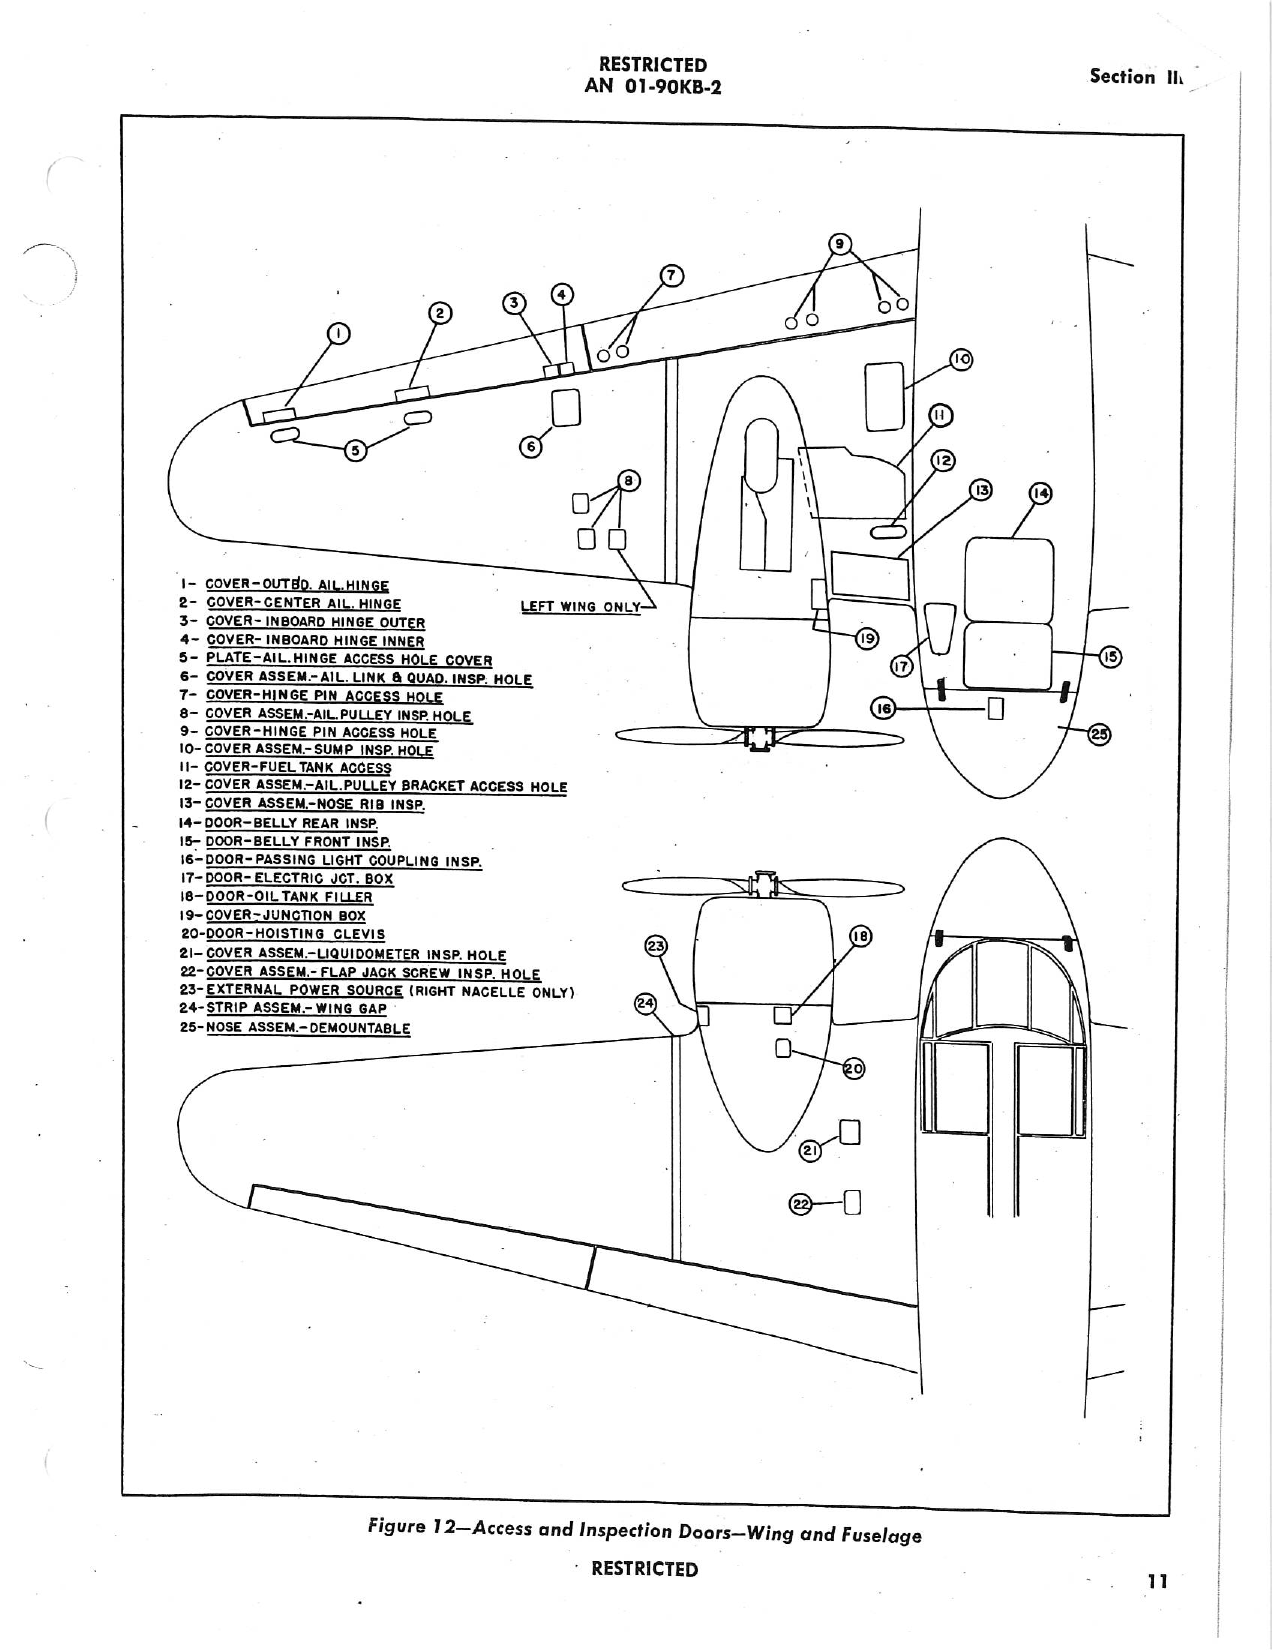 Sample page 5 from AirCorps Library document: Erection and Maintenance Instructions for AT-10